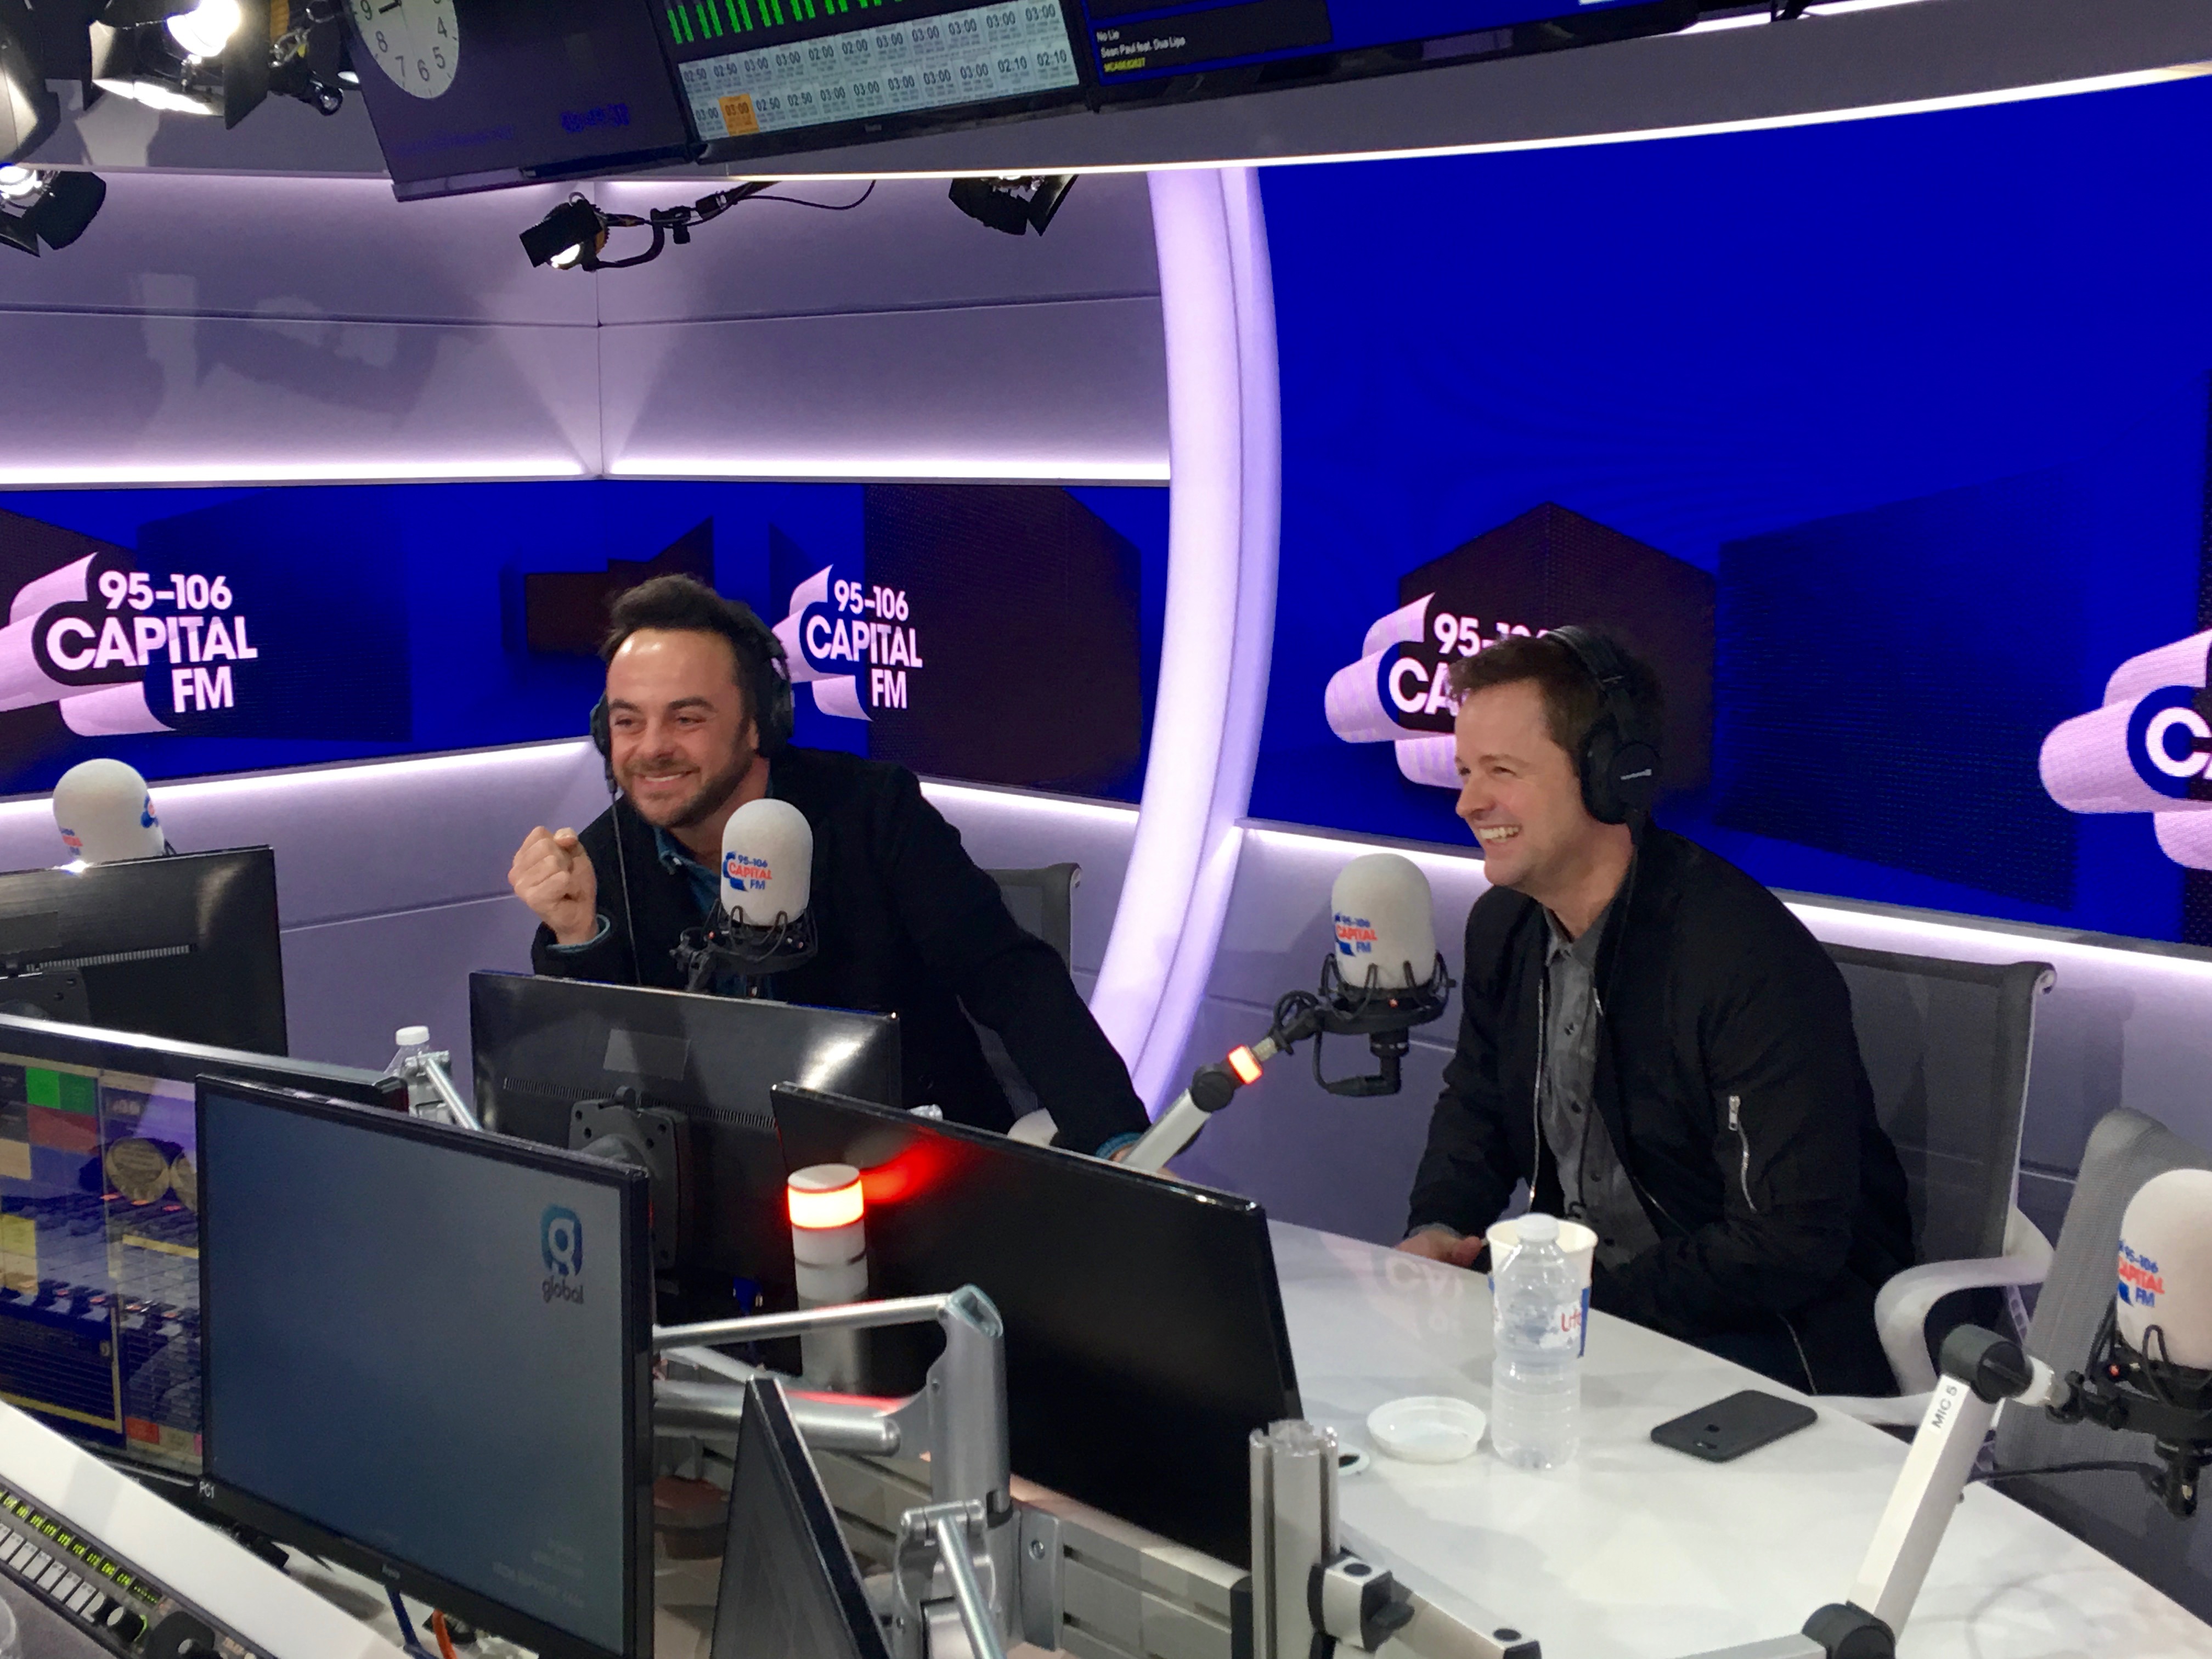 Ant and Dec with Roman Kemp